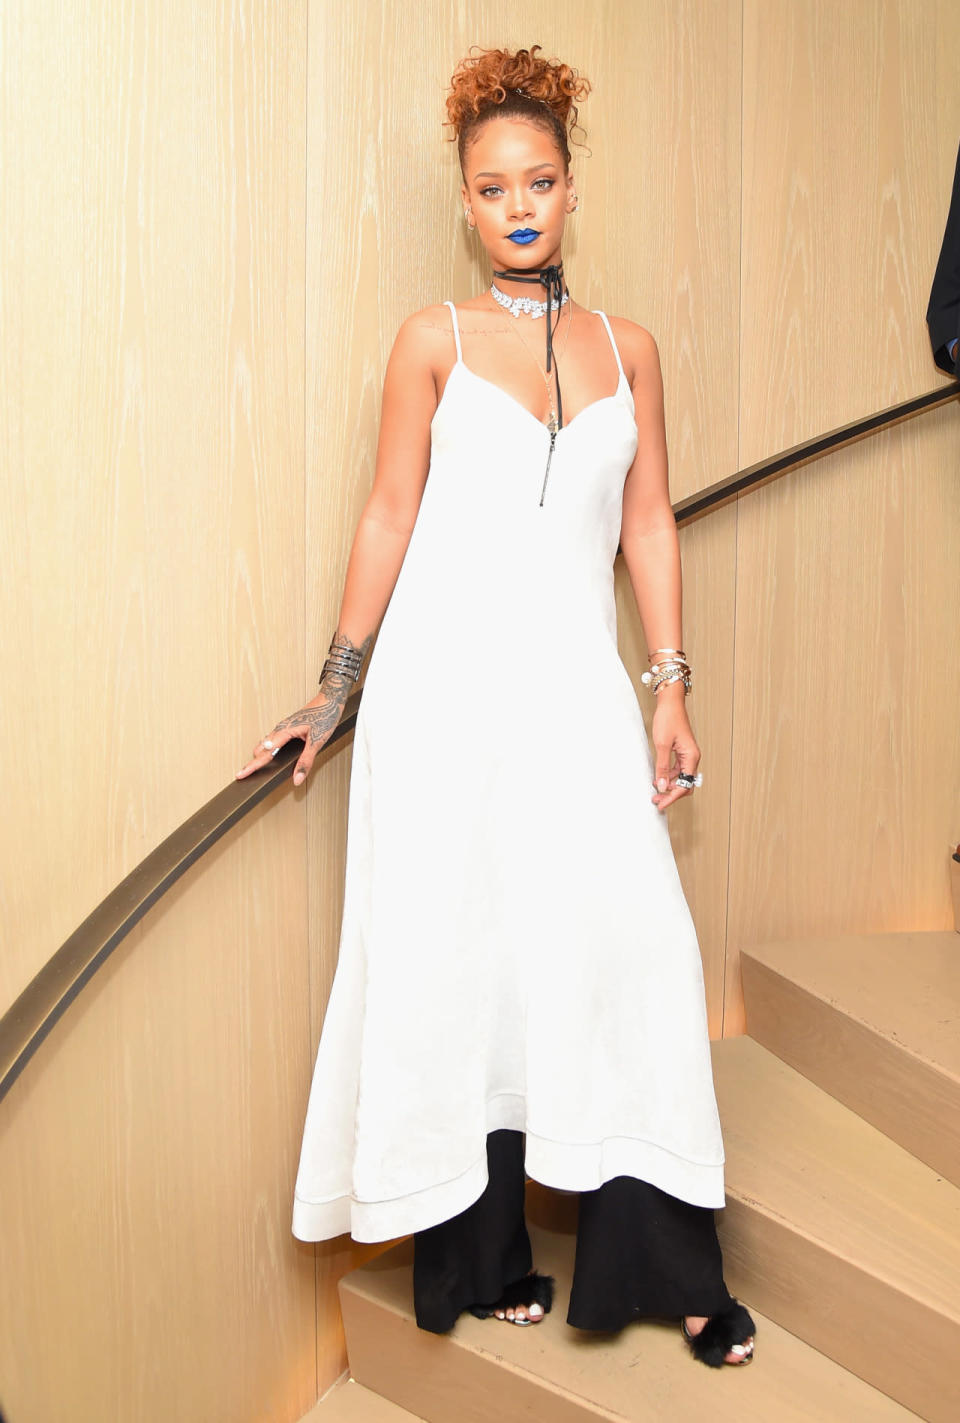 Rihanna wearing a dress with pants at her Fashion Week party on Sept. 10, 2015 in New York City.